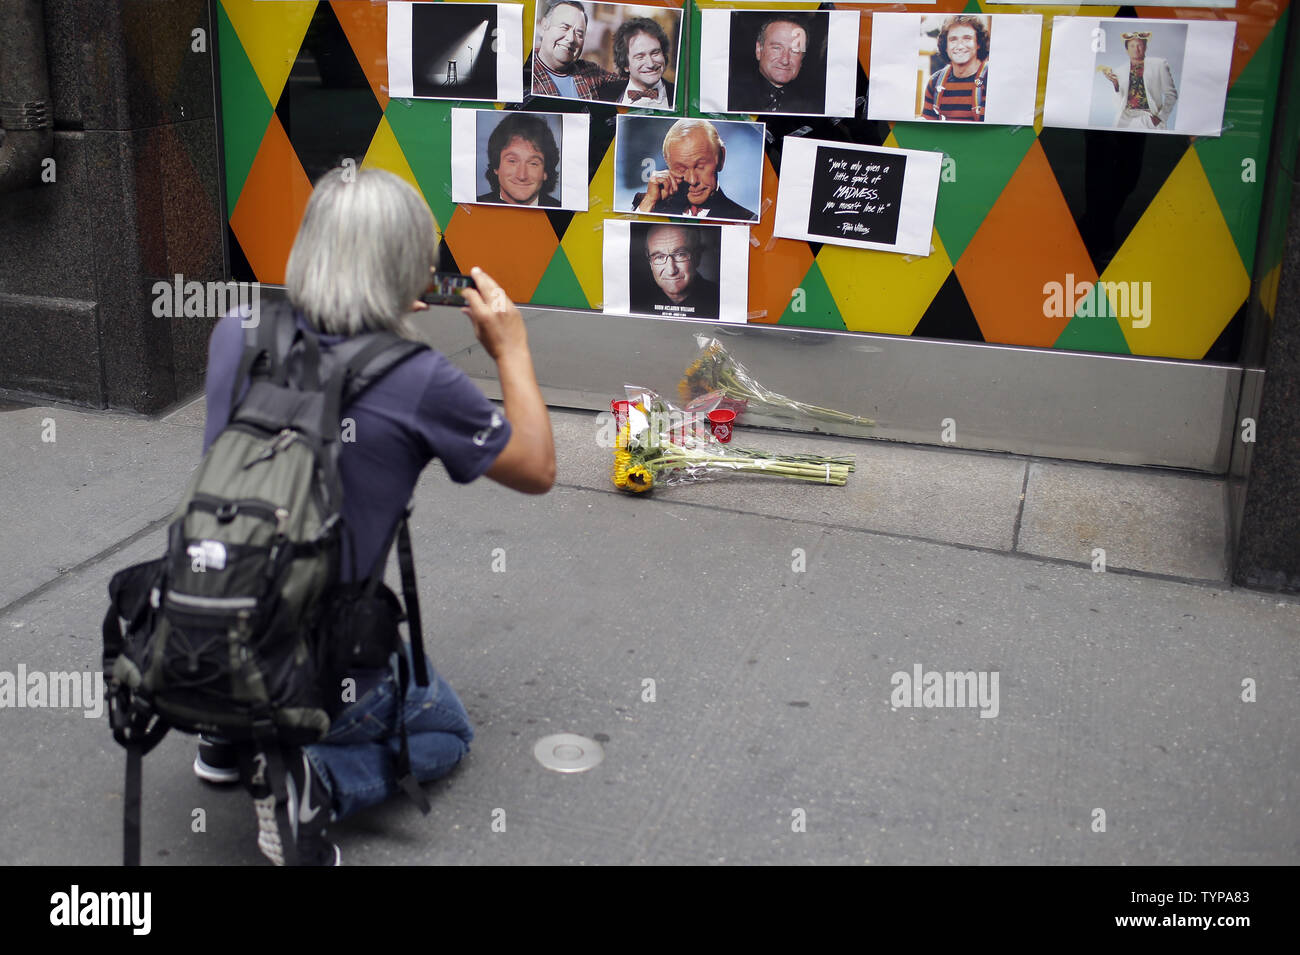 A man stops to take a photo of a tribute and memorial to the late Robin Williams at the entrance to Carolines on Broadway comedy club in New York City on August 12, 2014. Robin Williams committed suicide by hanging himself with a belt, the coroner said Tuesday in a press conference detailing the preliminary findings surrounding the actor and comedian's death.          UPI/John Angelillo Stock Photo